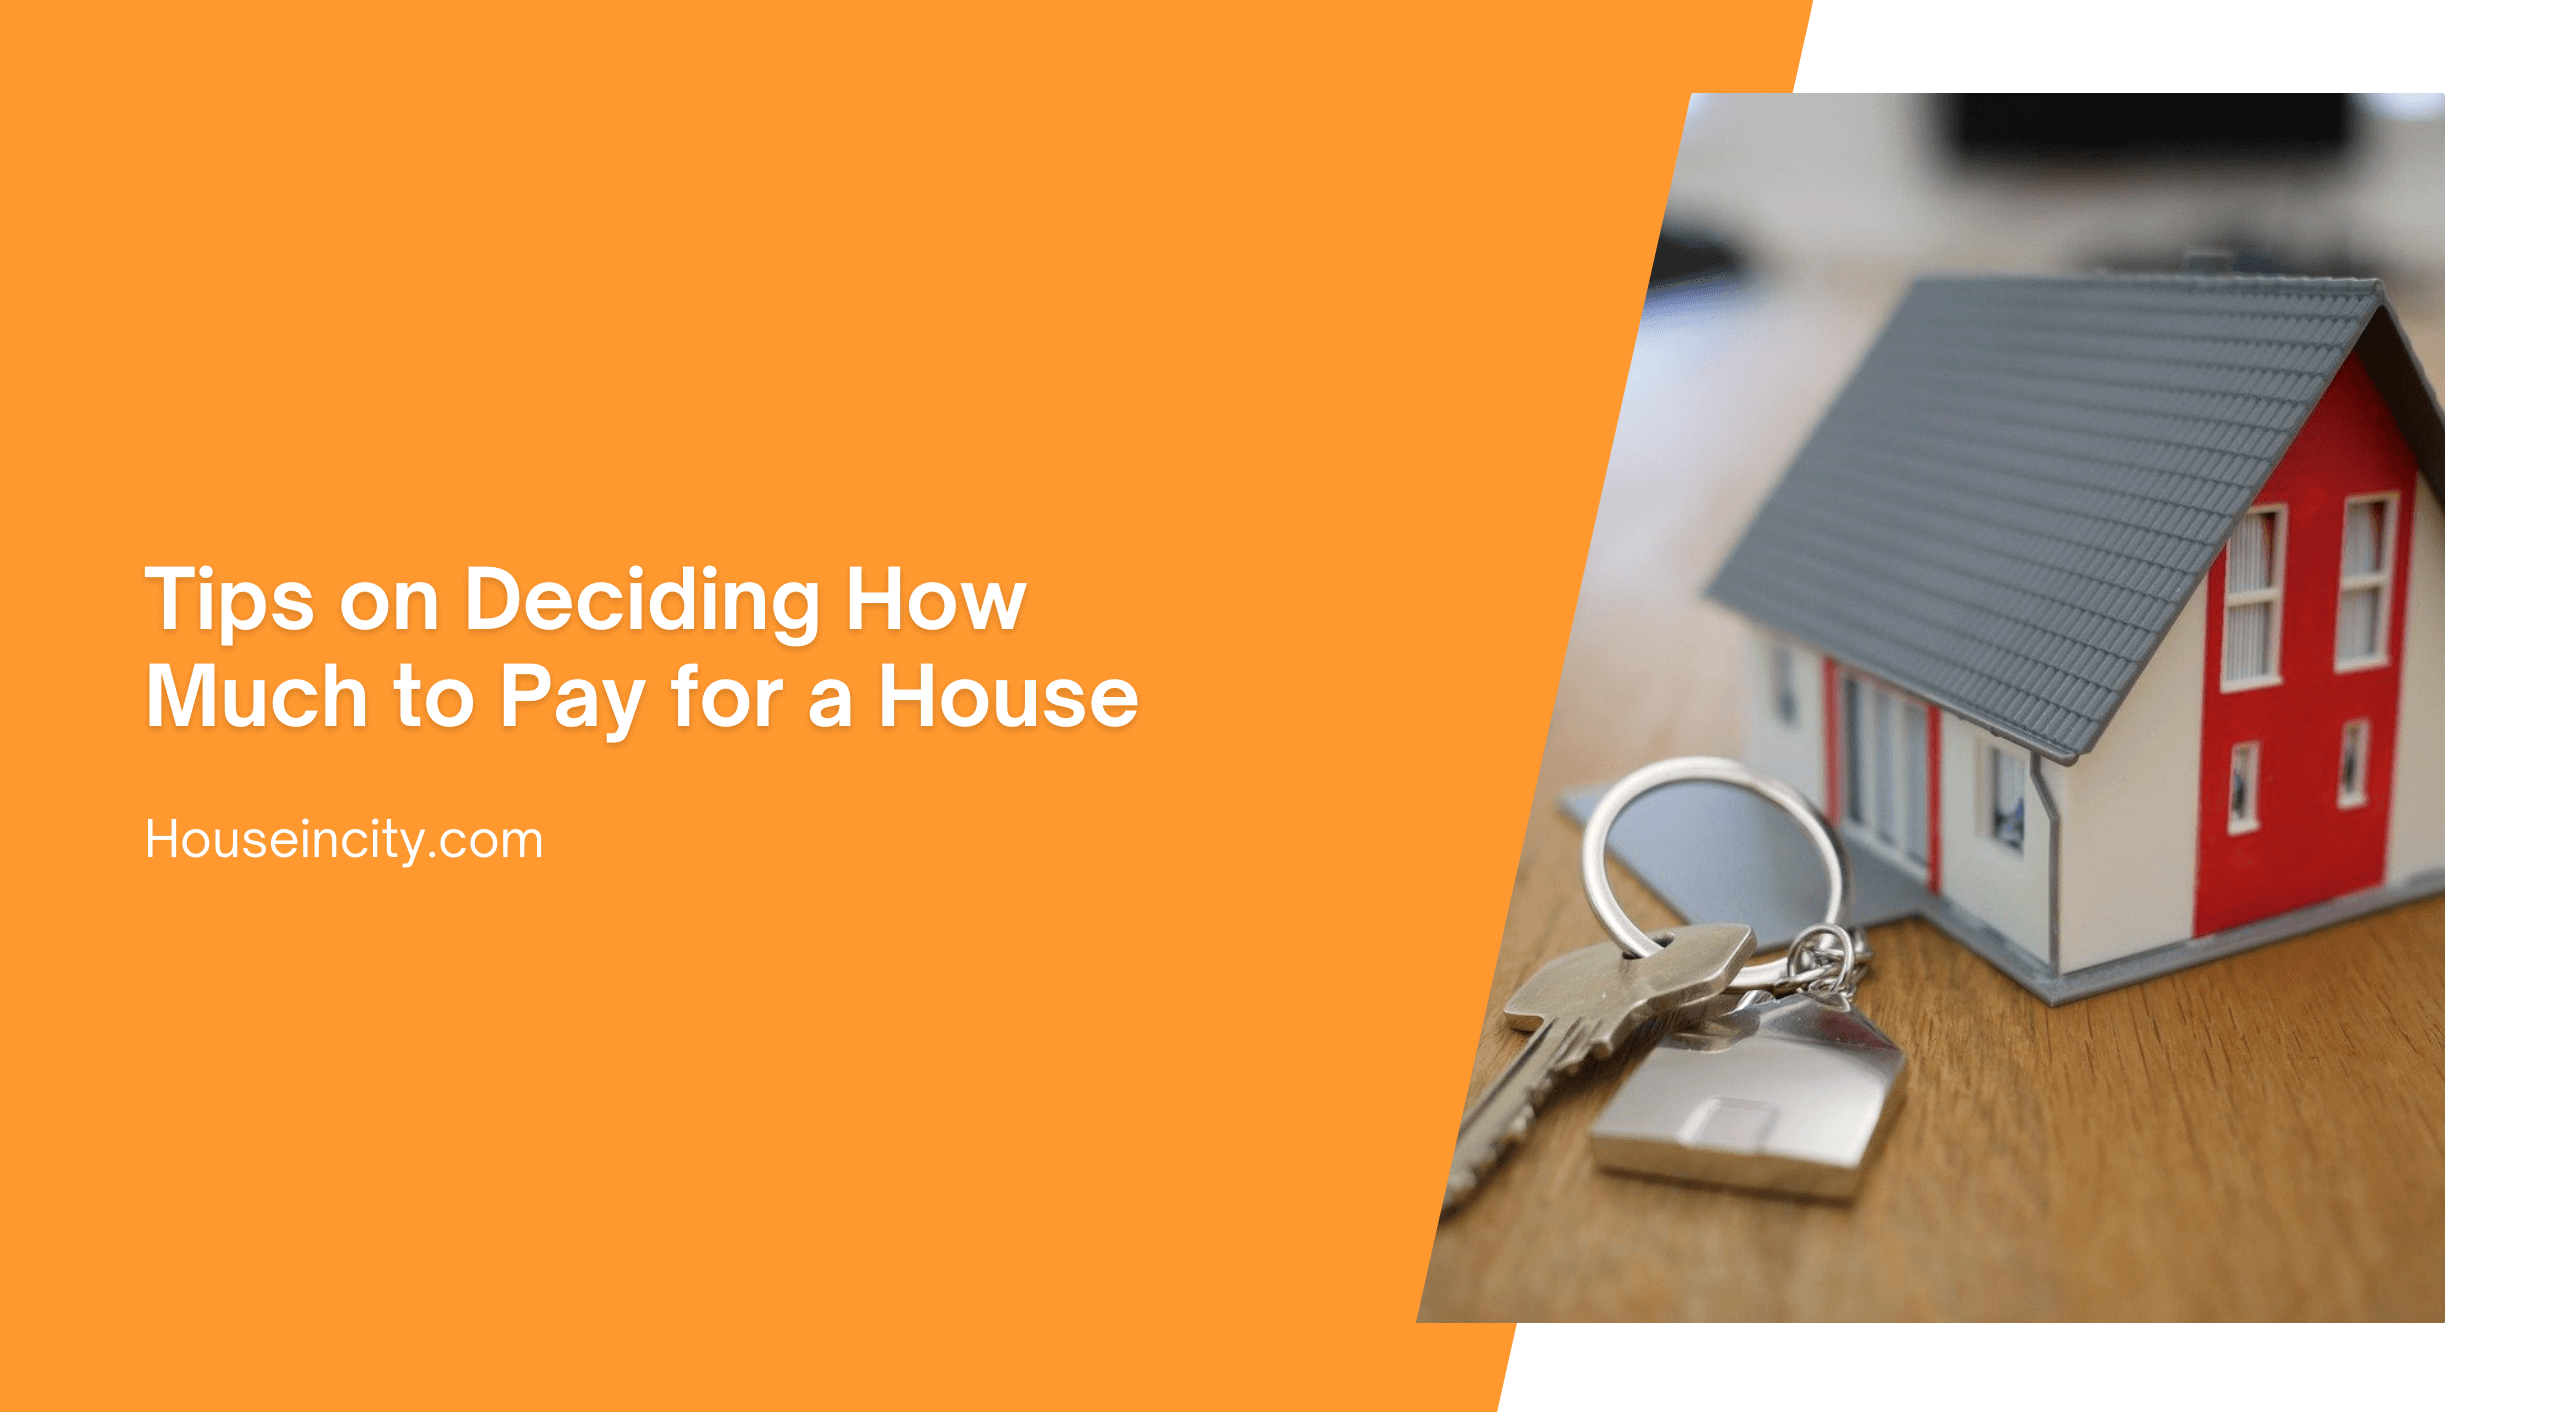 Tips on Deciding How Much to Pay for a House